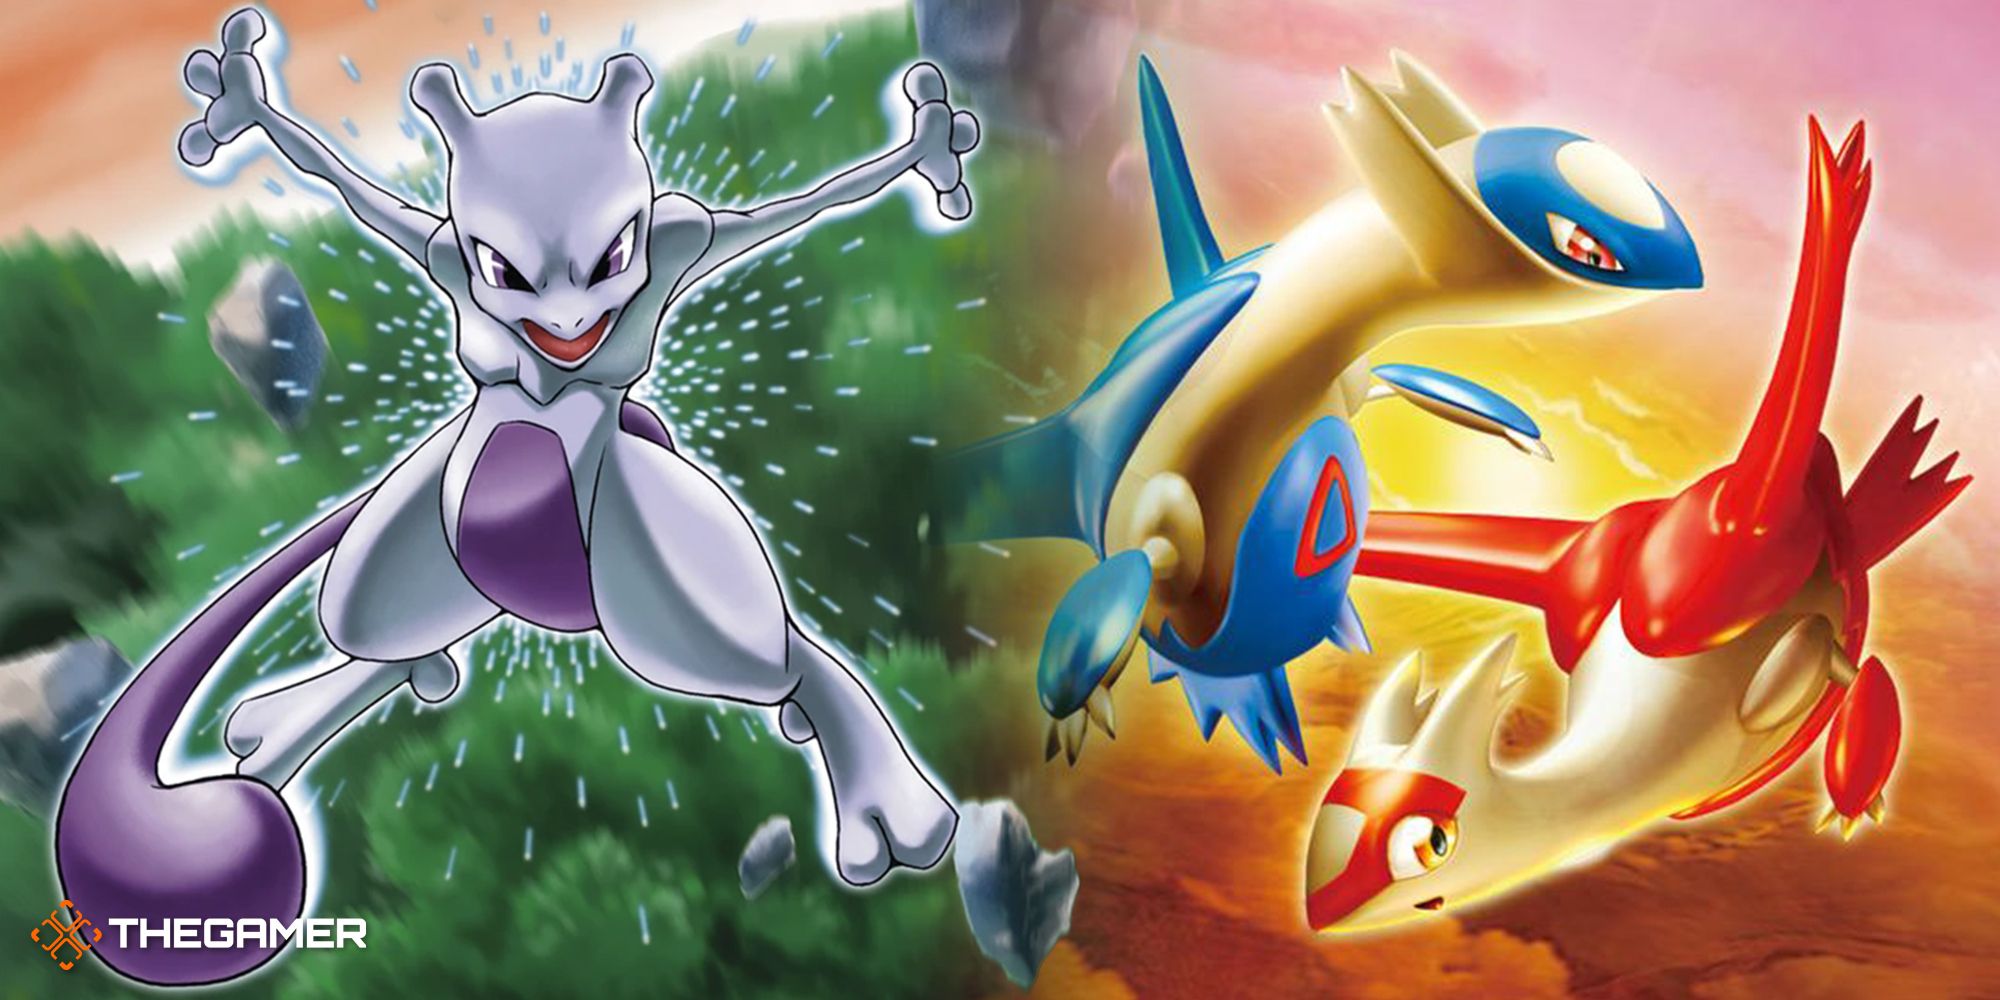 A split image of Mewtwo attacking on the Holon Phantoms box art while Latios and Latias fly on the EX Dragon Frontiers art.